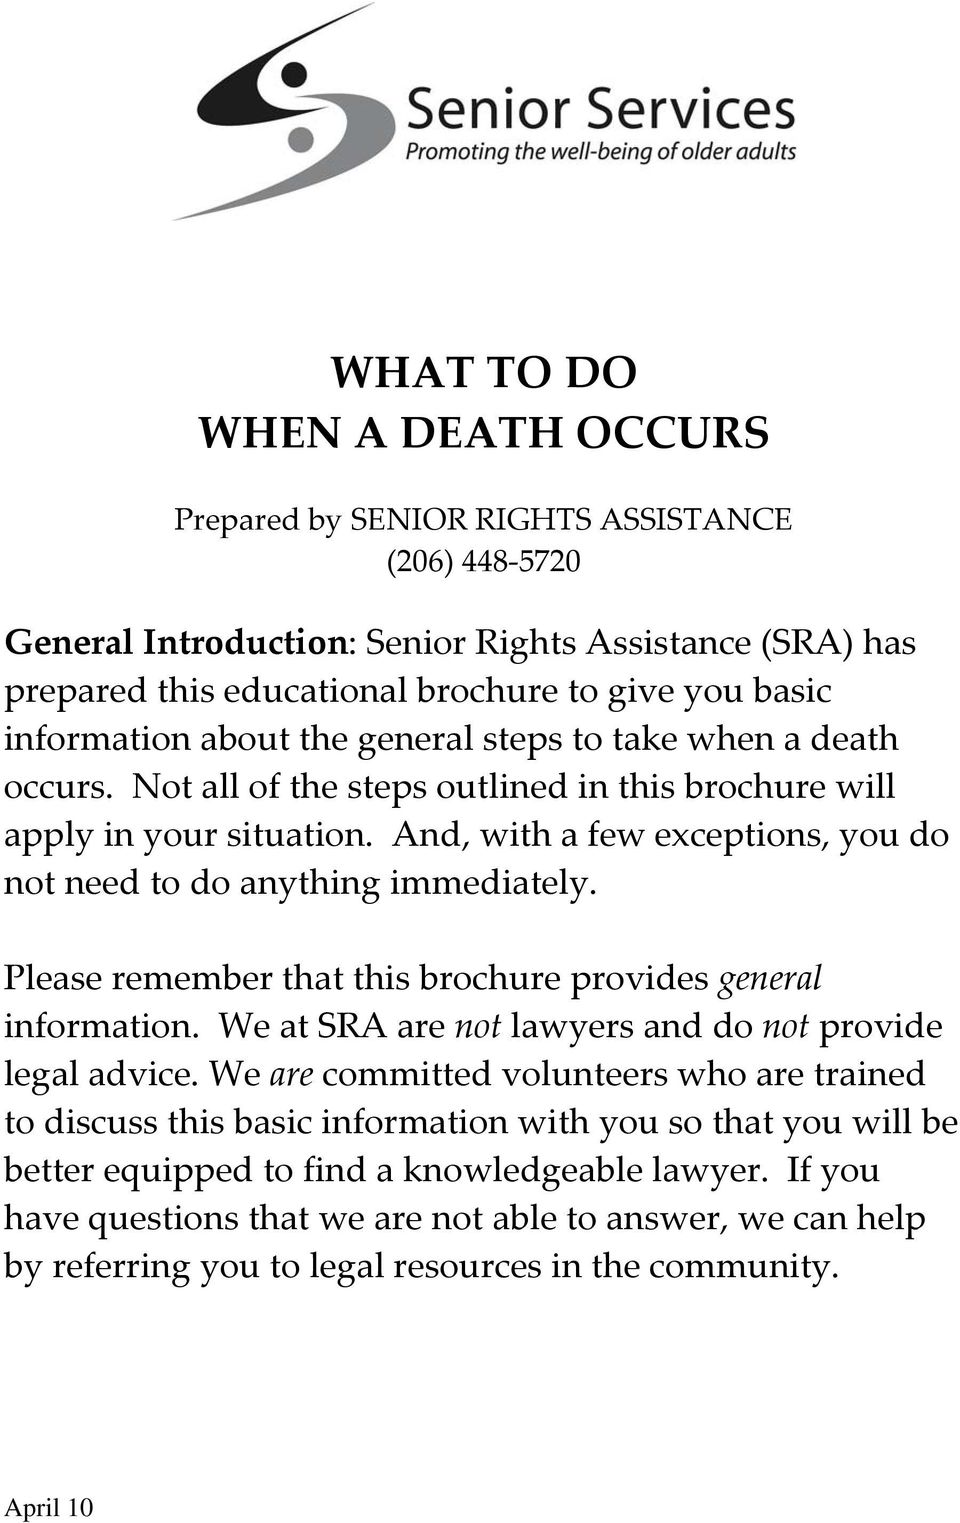 And, with a few exceptions, you do not need to do anything immediately. Please remember that this brochure provides general information. We at SRA are not lawyers and do not provide legal advice.